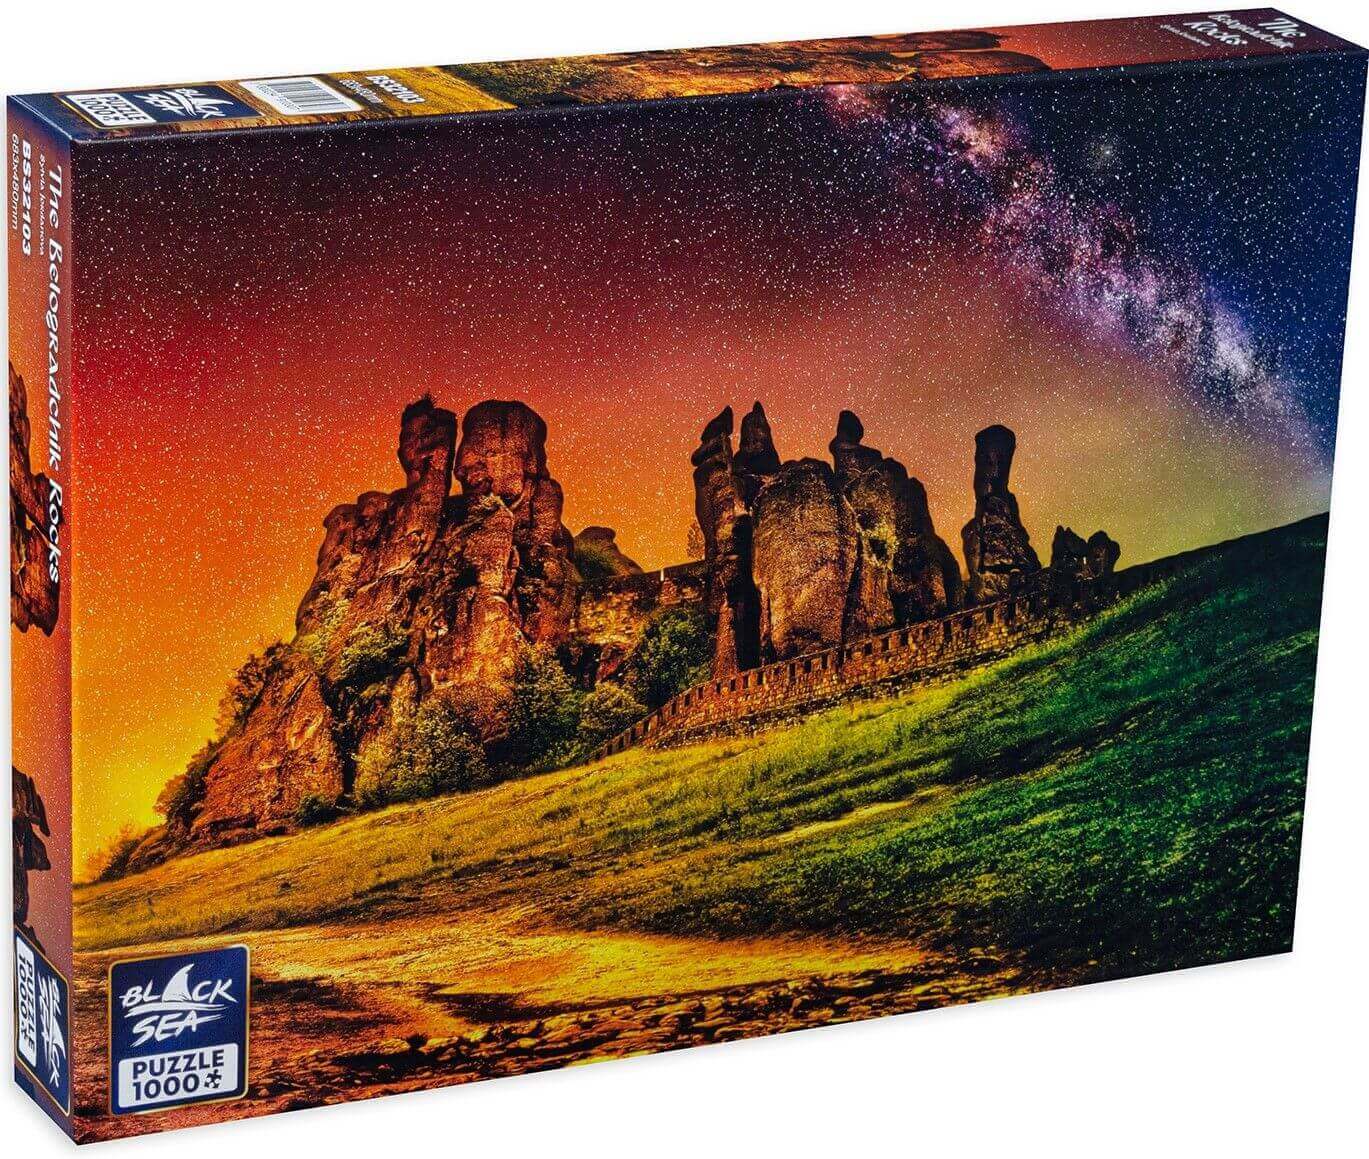 Puzzle Black Sea Premium 1000 pieces - The Belogradchik Rocks, The rock formations near the town of Belogradchik are among the most special natural phenomena in Bulgaria. They occupy an area about 30 km long, and 3 to 5 km wide, and they reach 200 metres